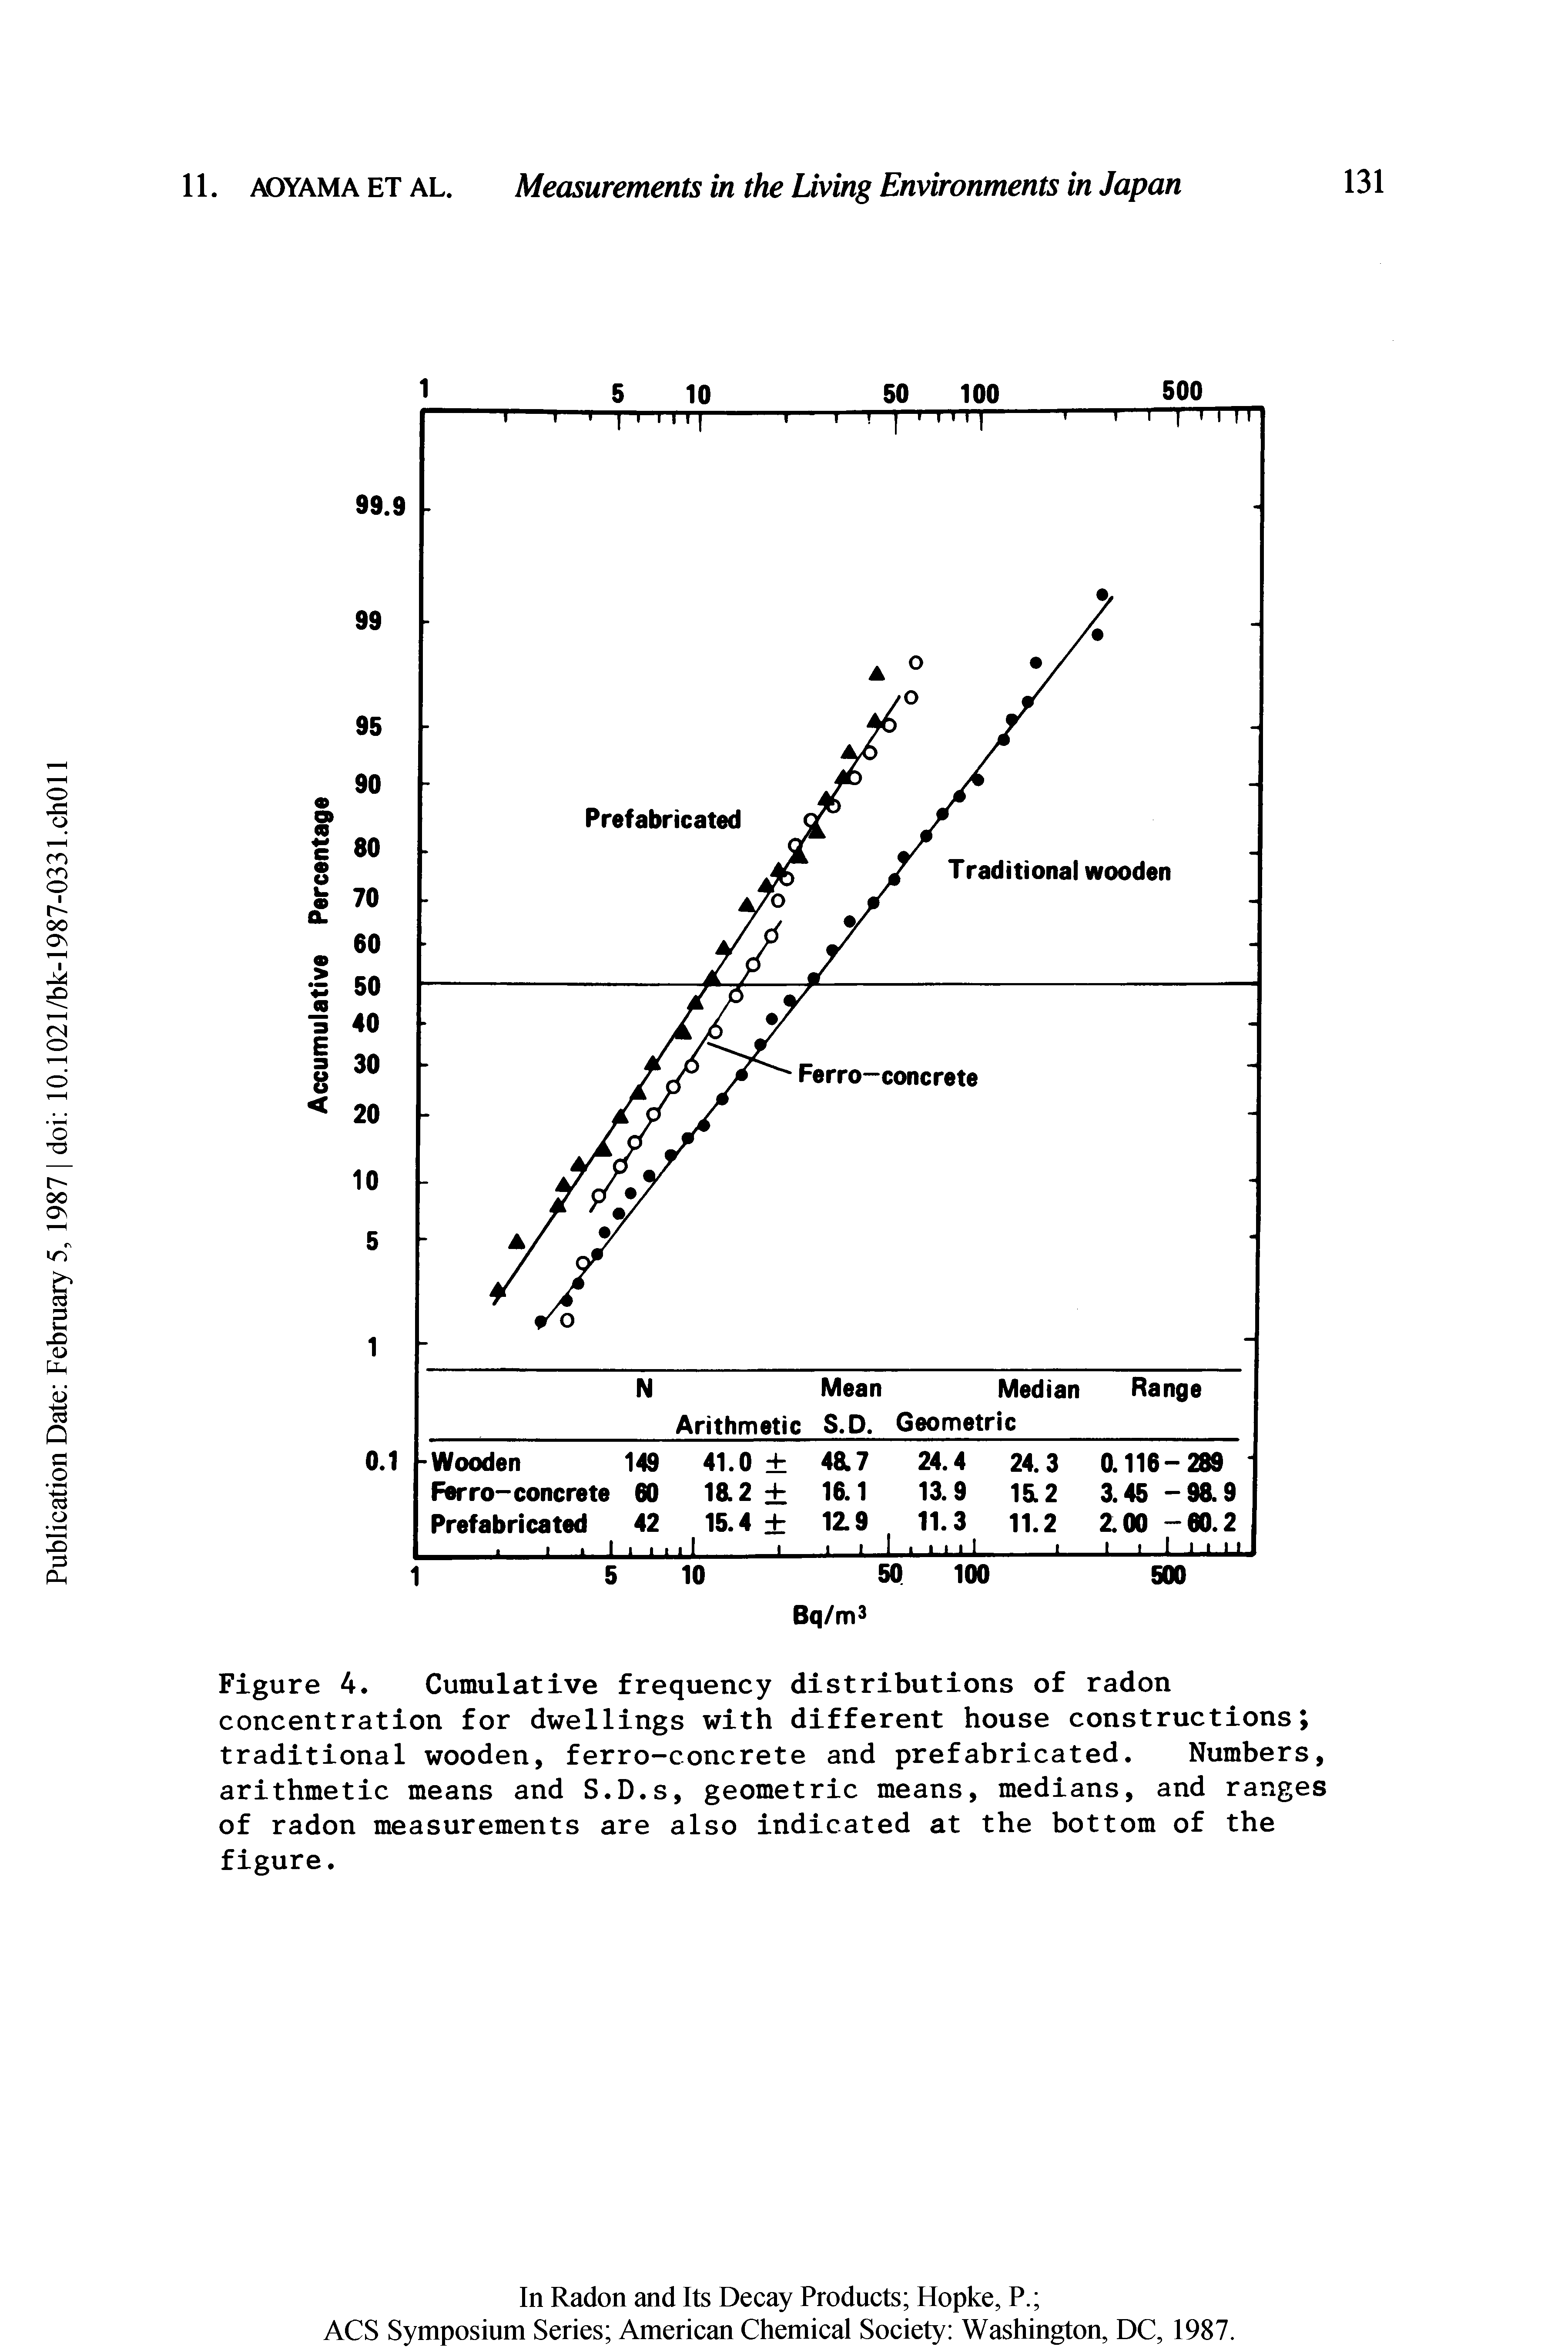 Figure 4. Cumulative frequency distributions of radon concentration for dwellings with different house constructions traditional wooden, ferro-concrete and prefabricated. Numbers, arithmetic means and S.D.s, geometric means, medians, and ranges of radon measurements are also indicated at the bottom of the figure.